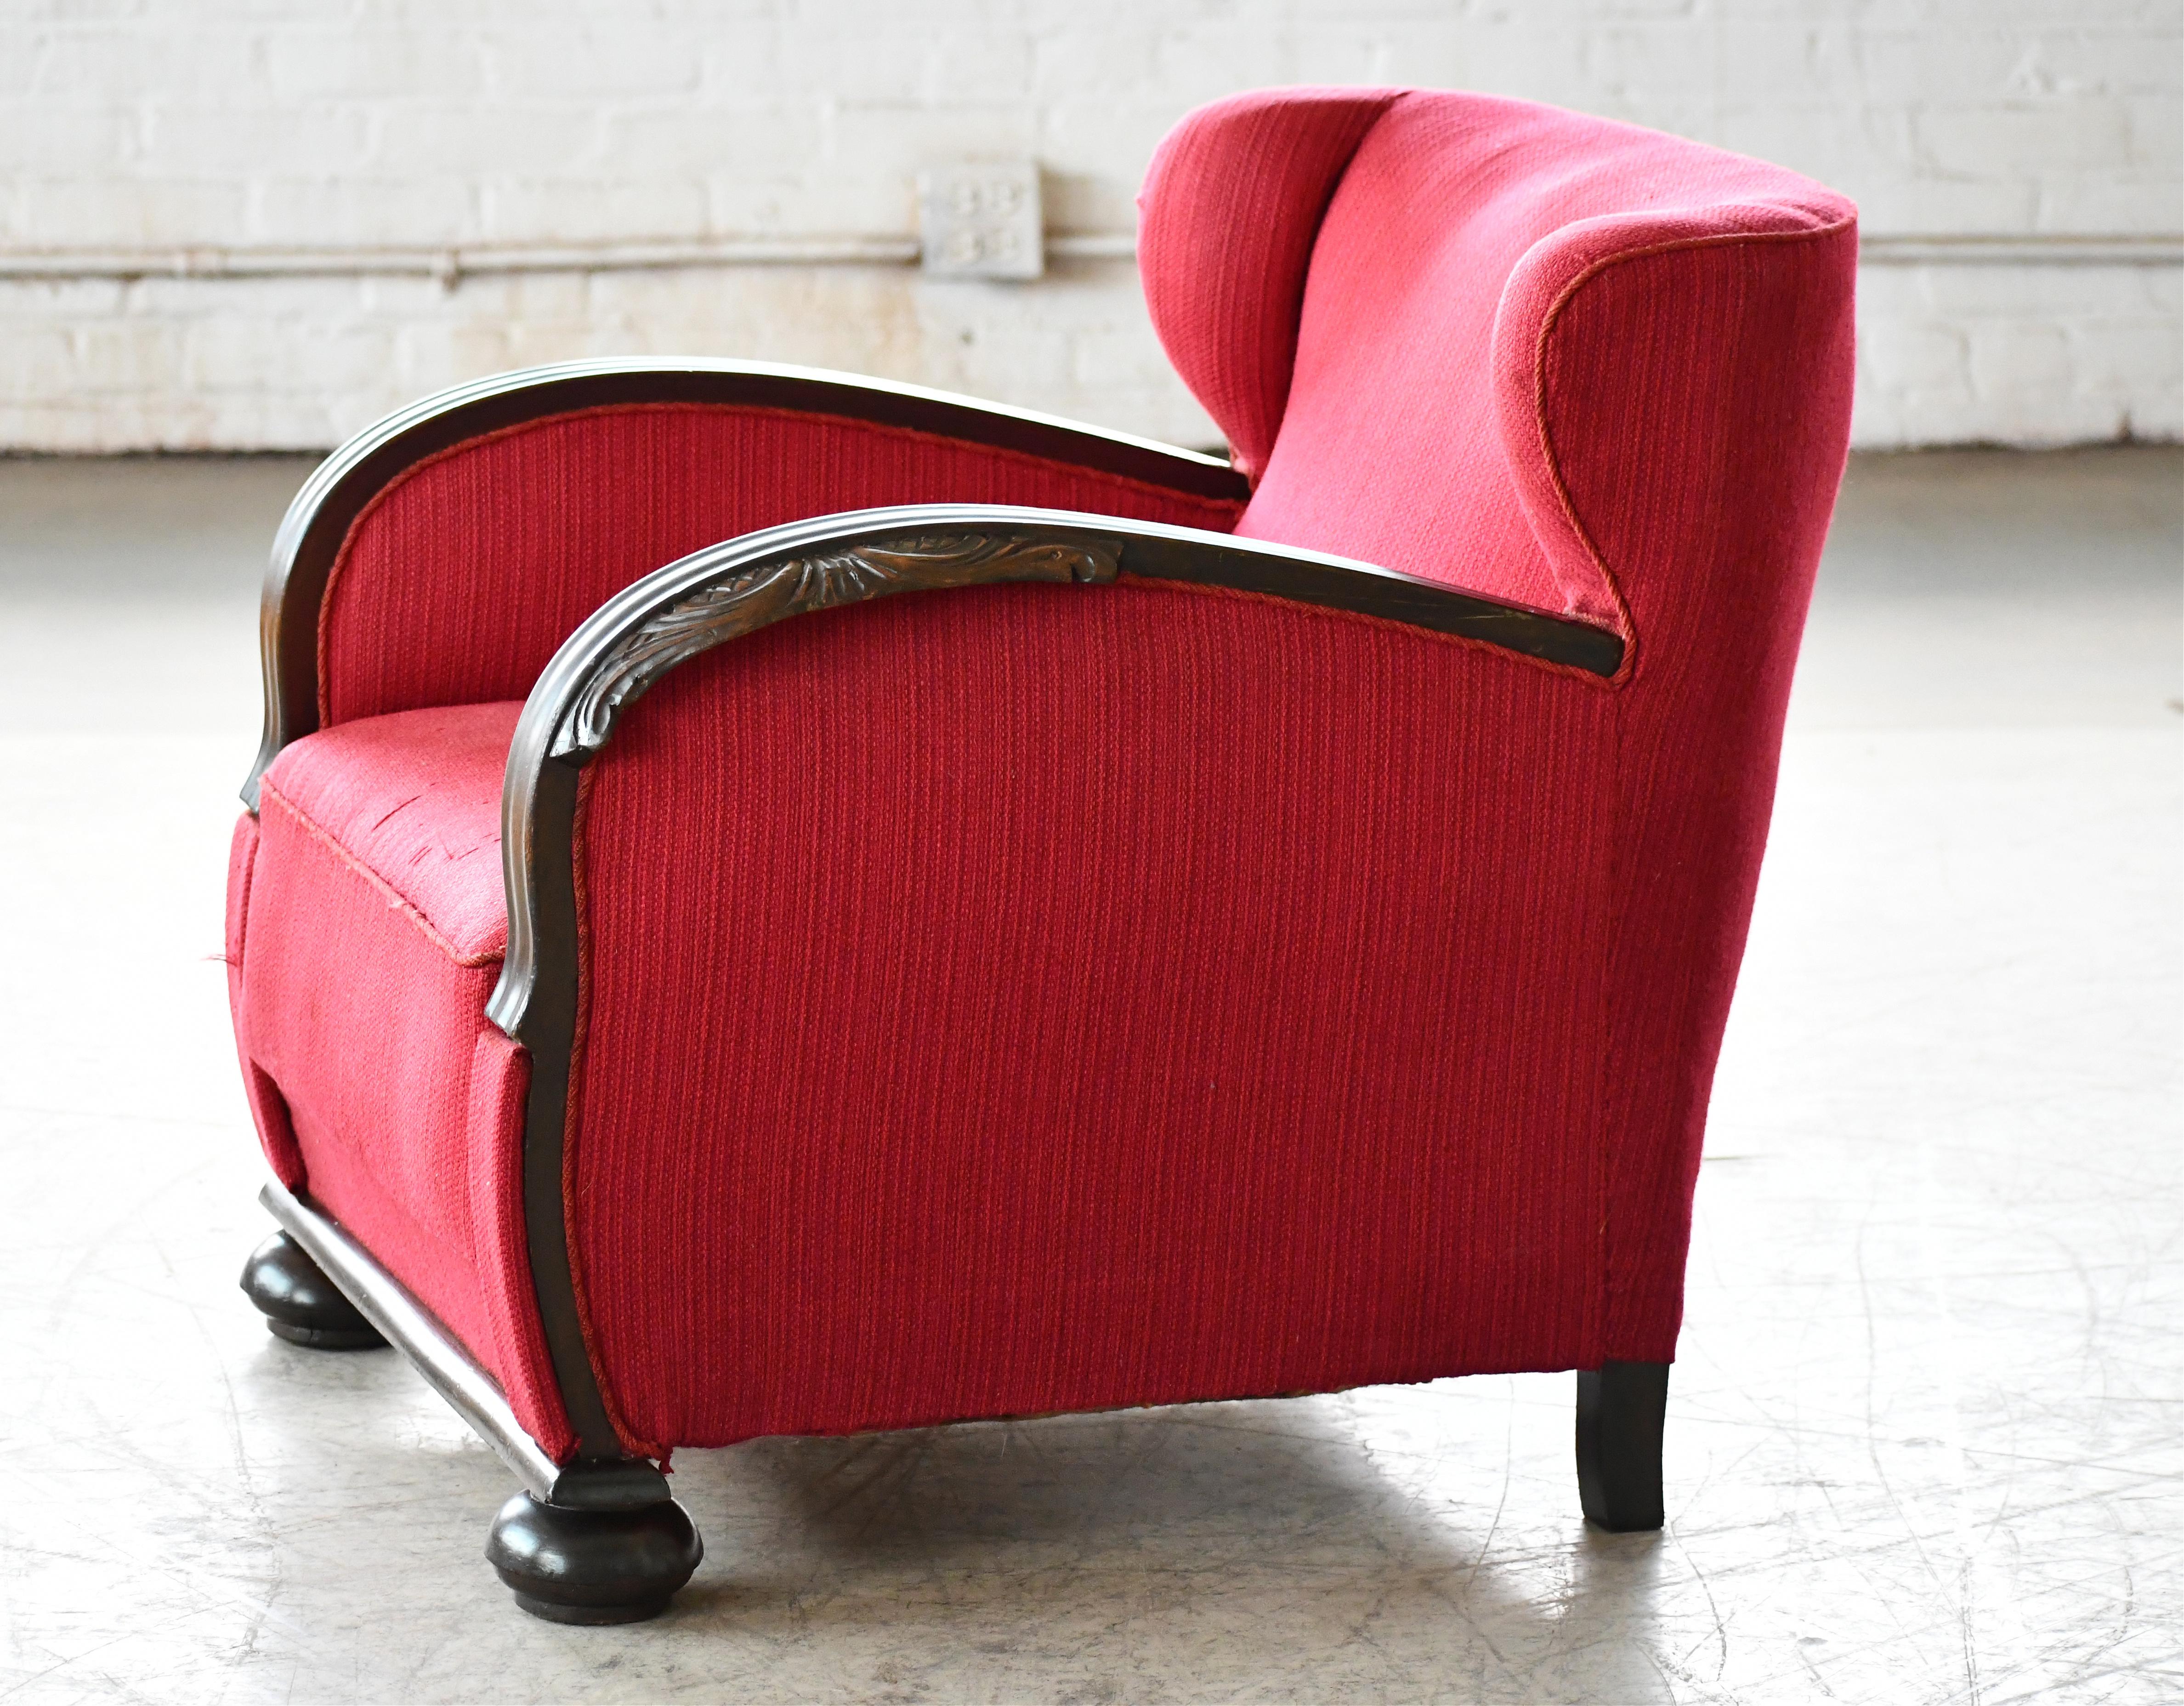 Danish 1930s Art Deco Lounge Chair in Red Mohair with Carved Armrests For Sale 3